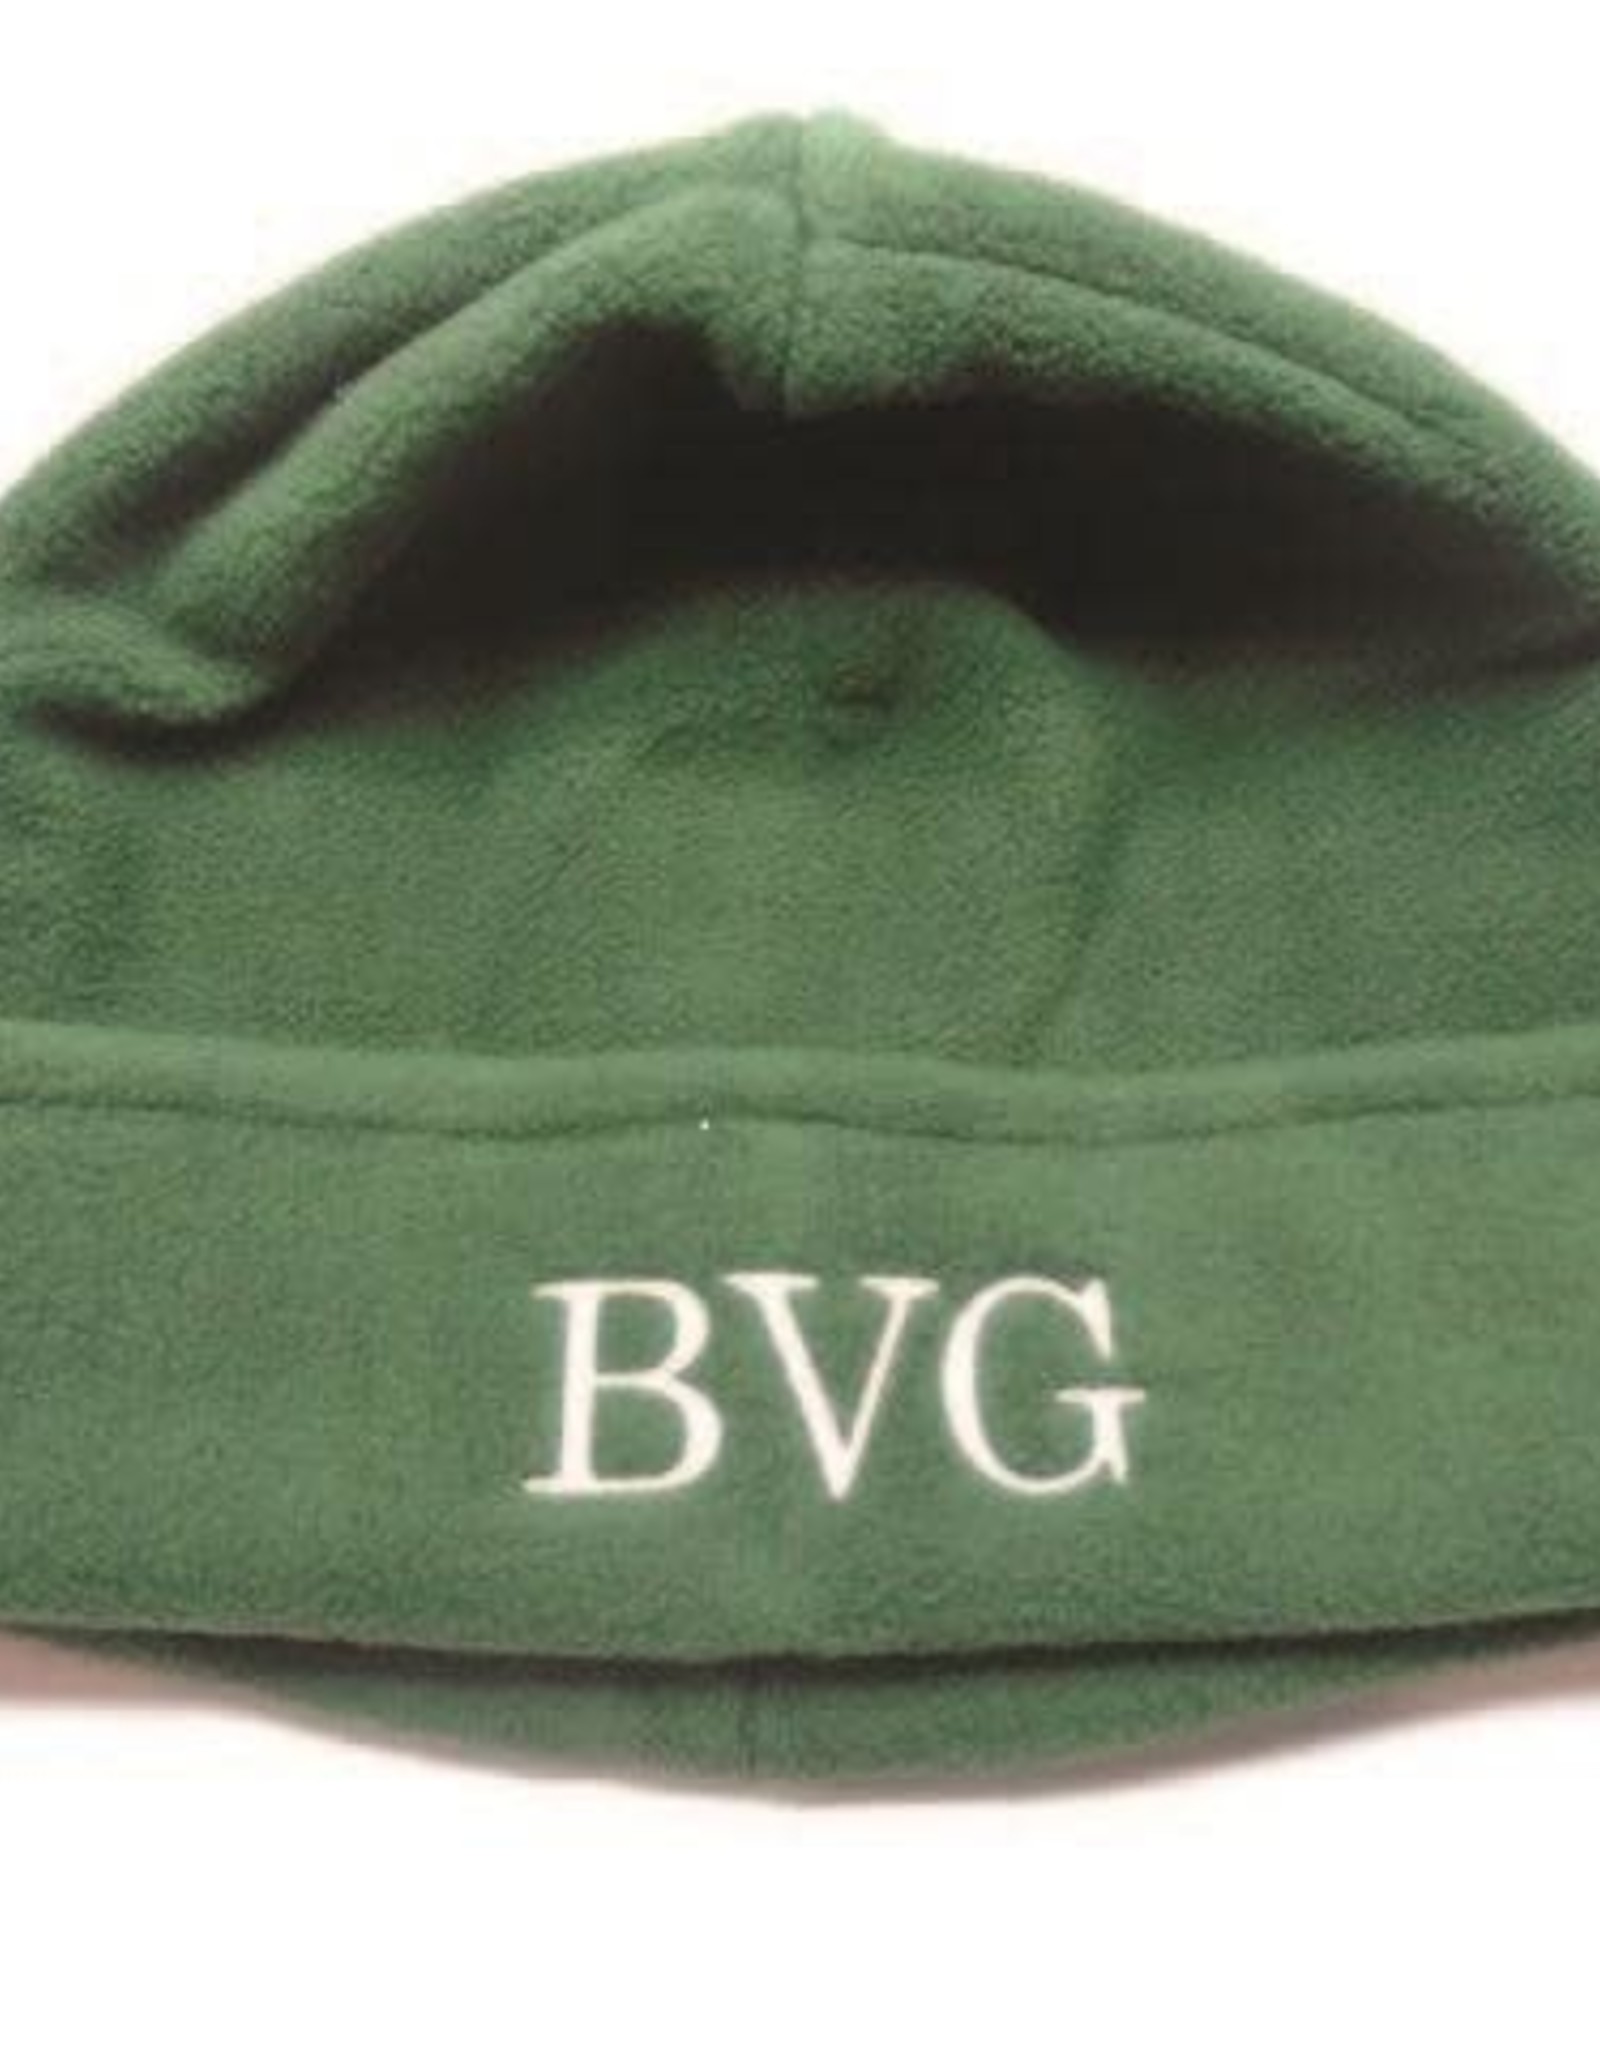 Toques - Solid Green - BVG